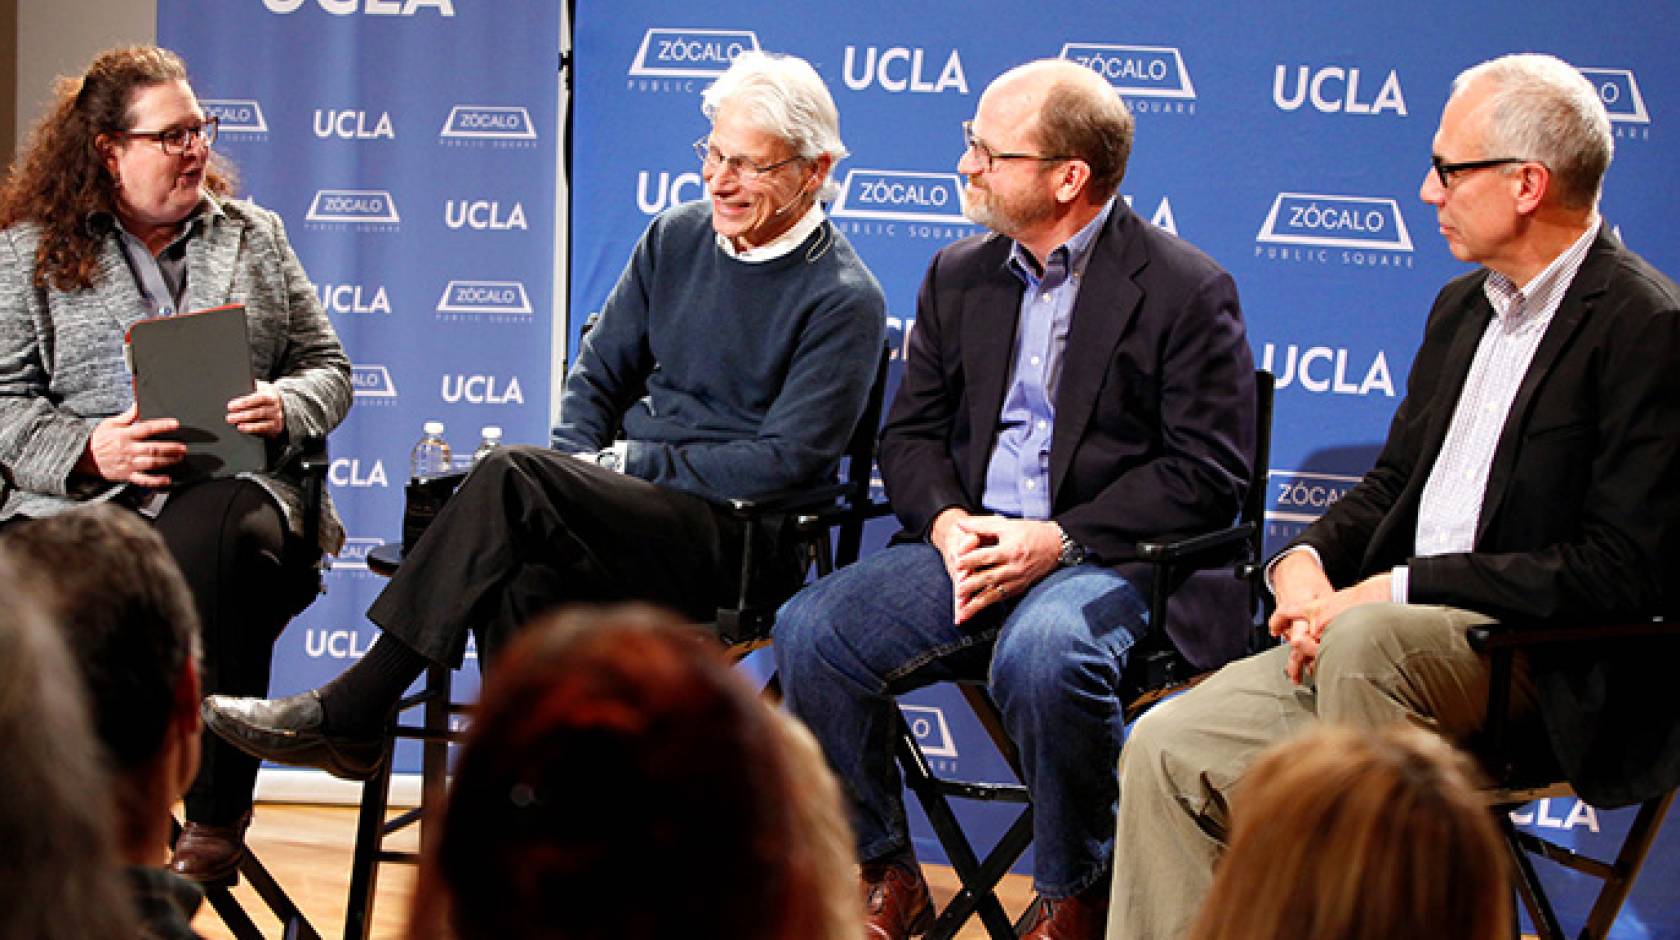 Moderator Evan Kleiman, Robert Goldberg, Russ Parsons and Edward Parson talk about the controversy over genetic modifications of our food. Goldberg and Parson are UCLA professors.